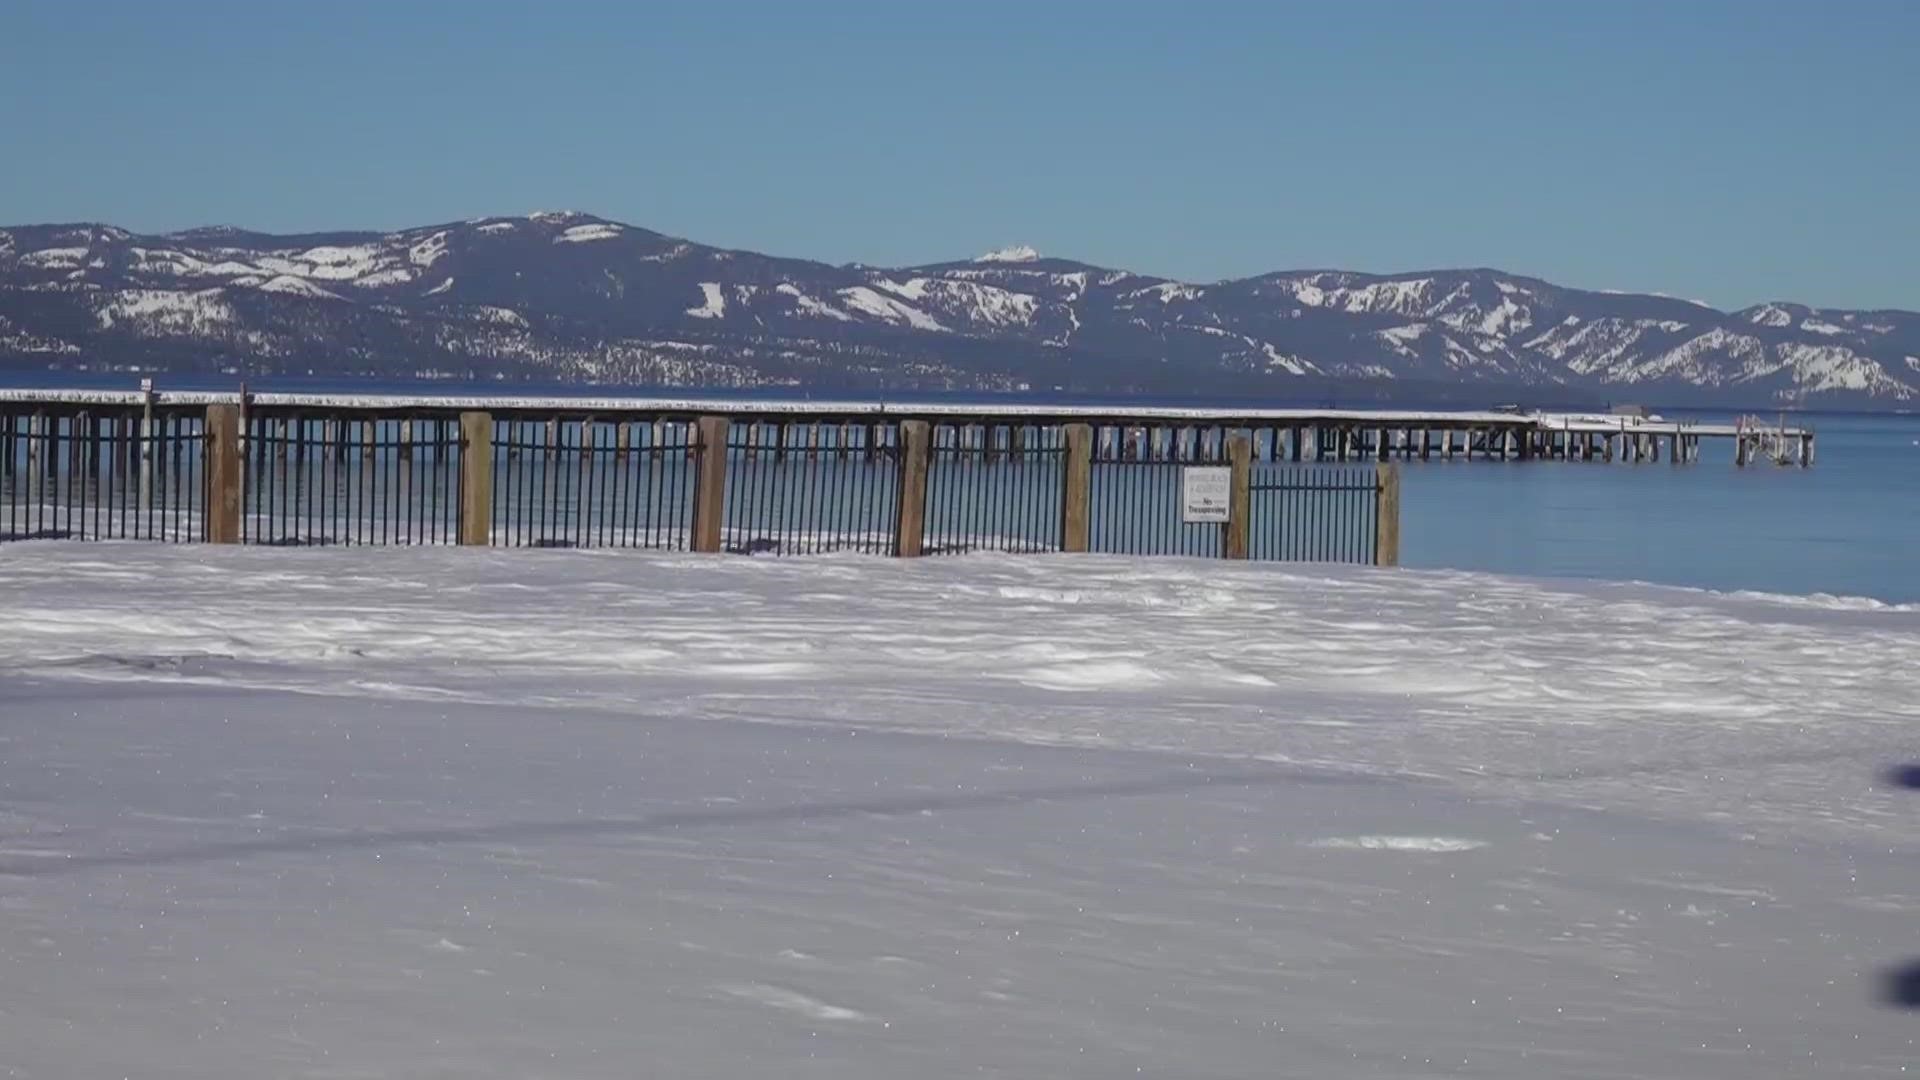 There is a high concern for the health of the lake and Tahoe’s water clarity as fine sediment particles can remain suspended in the water and reduce clarity.